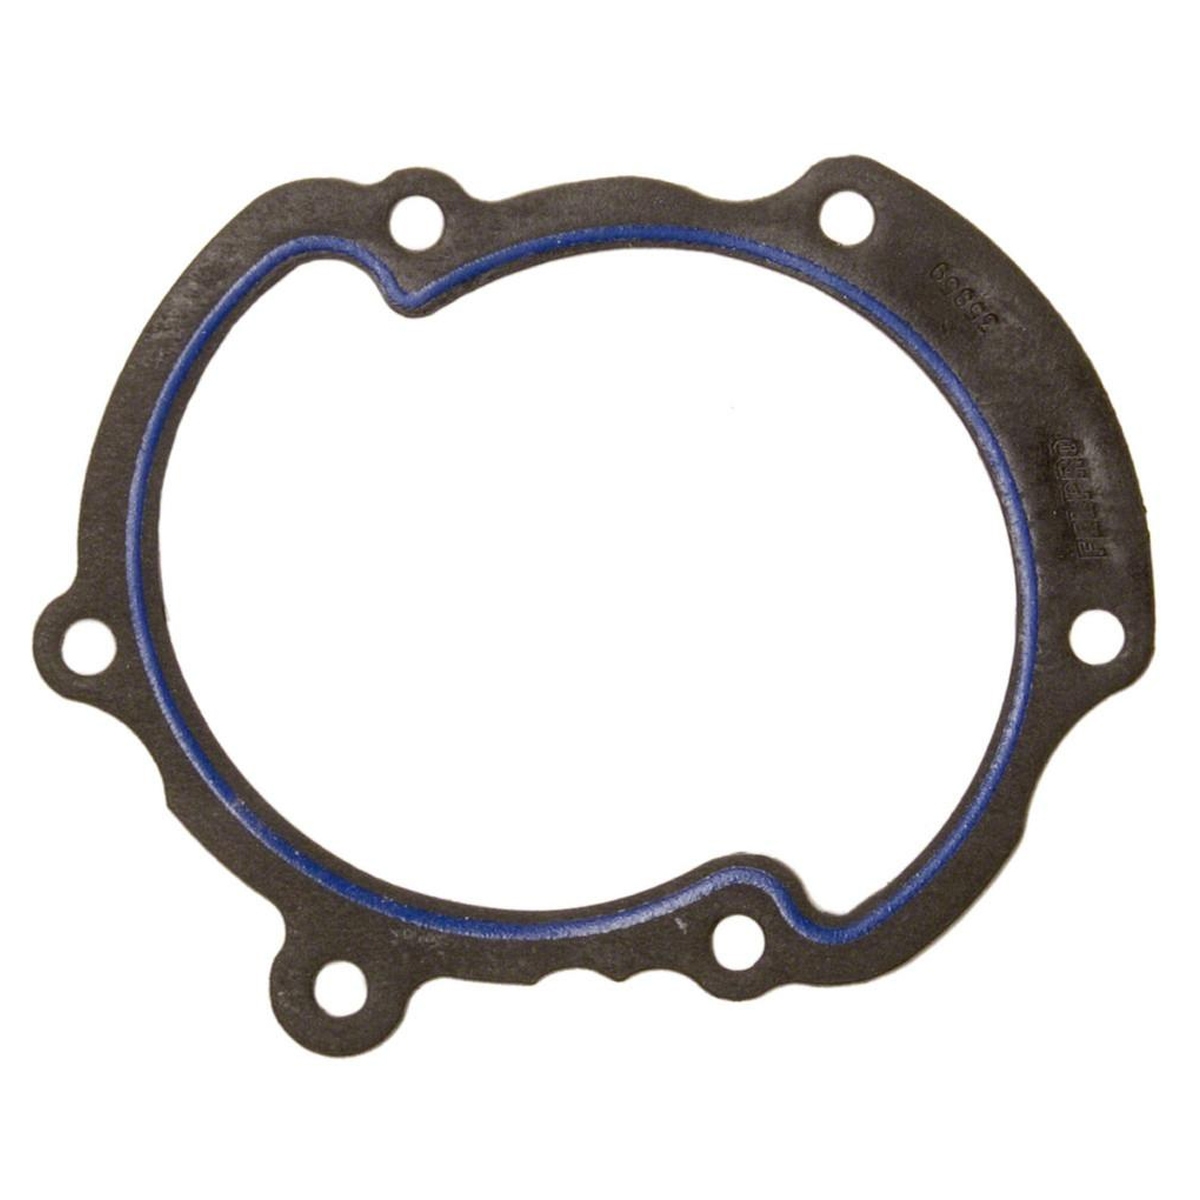 VAUXHALL AND OPEL ARENA Water Pump Gasket